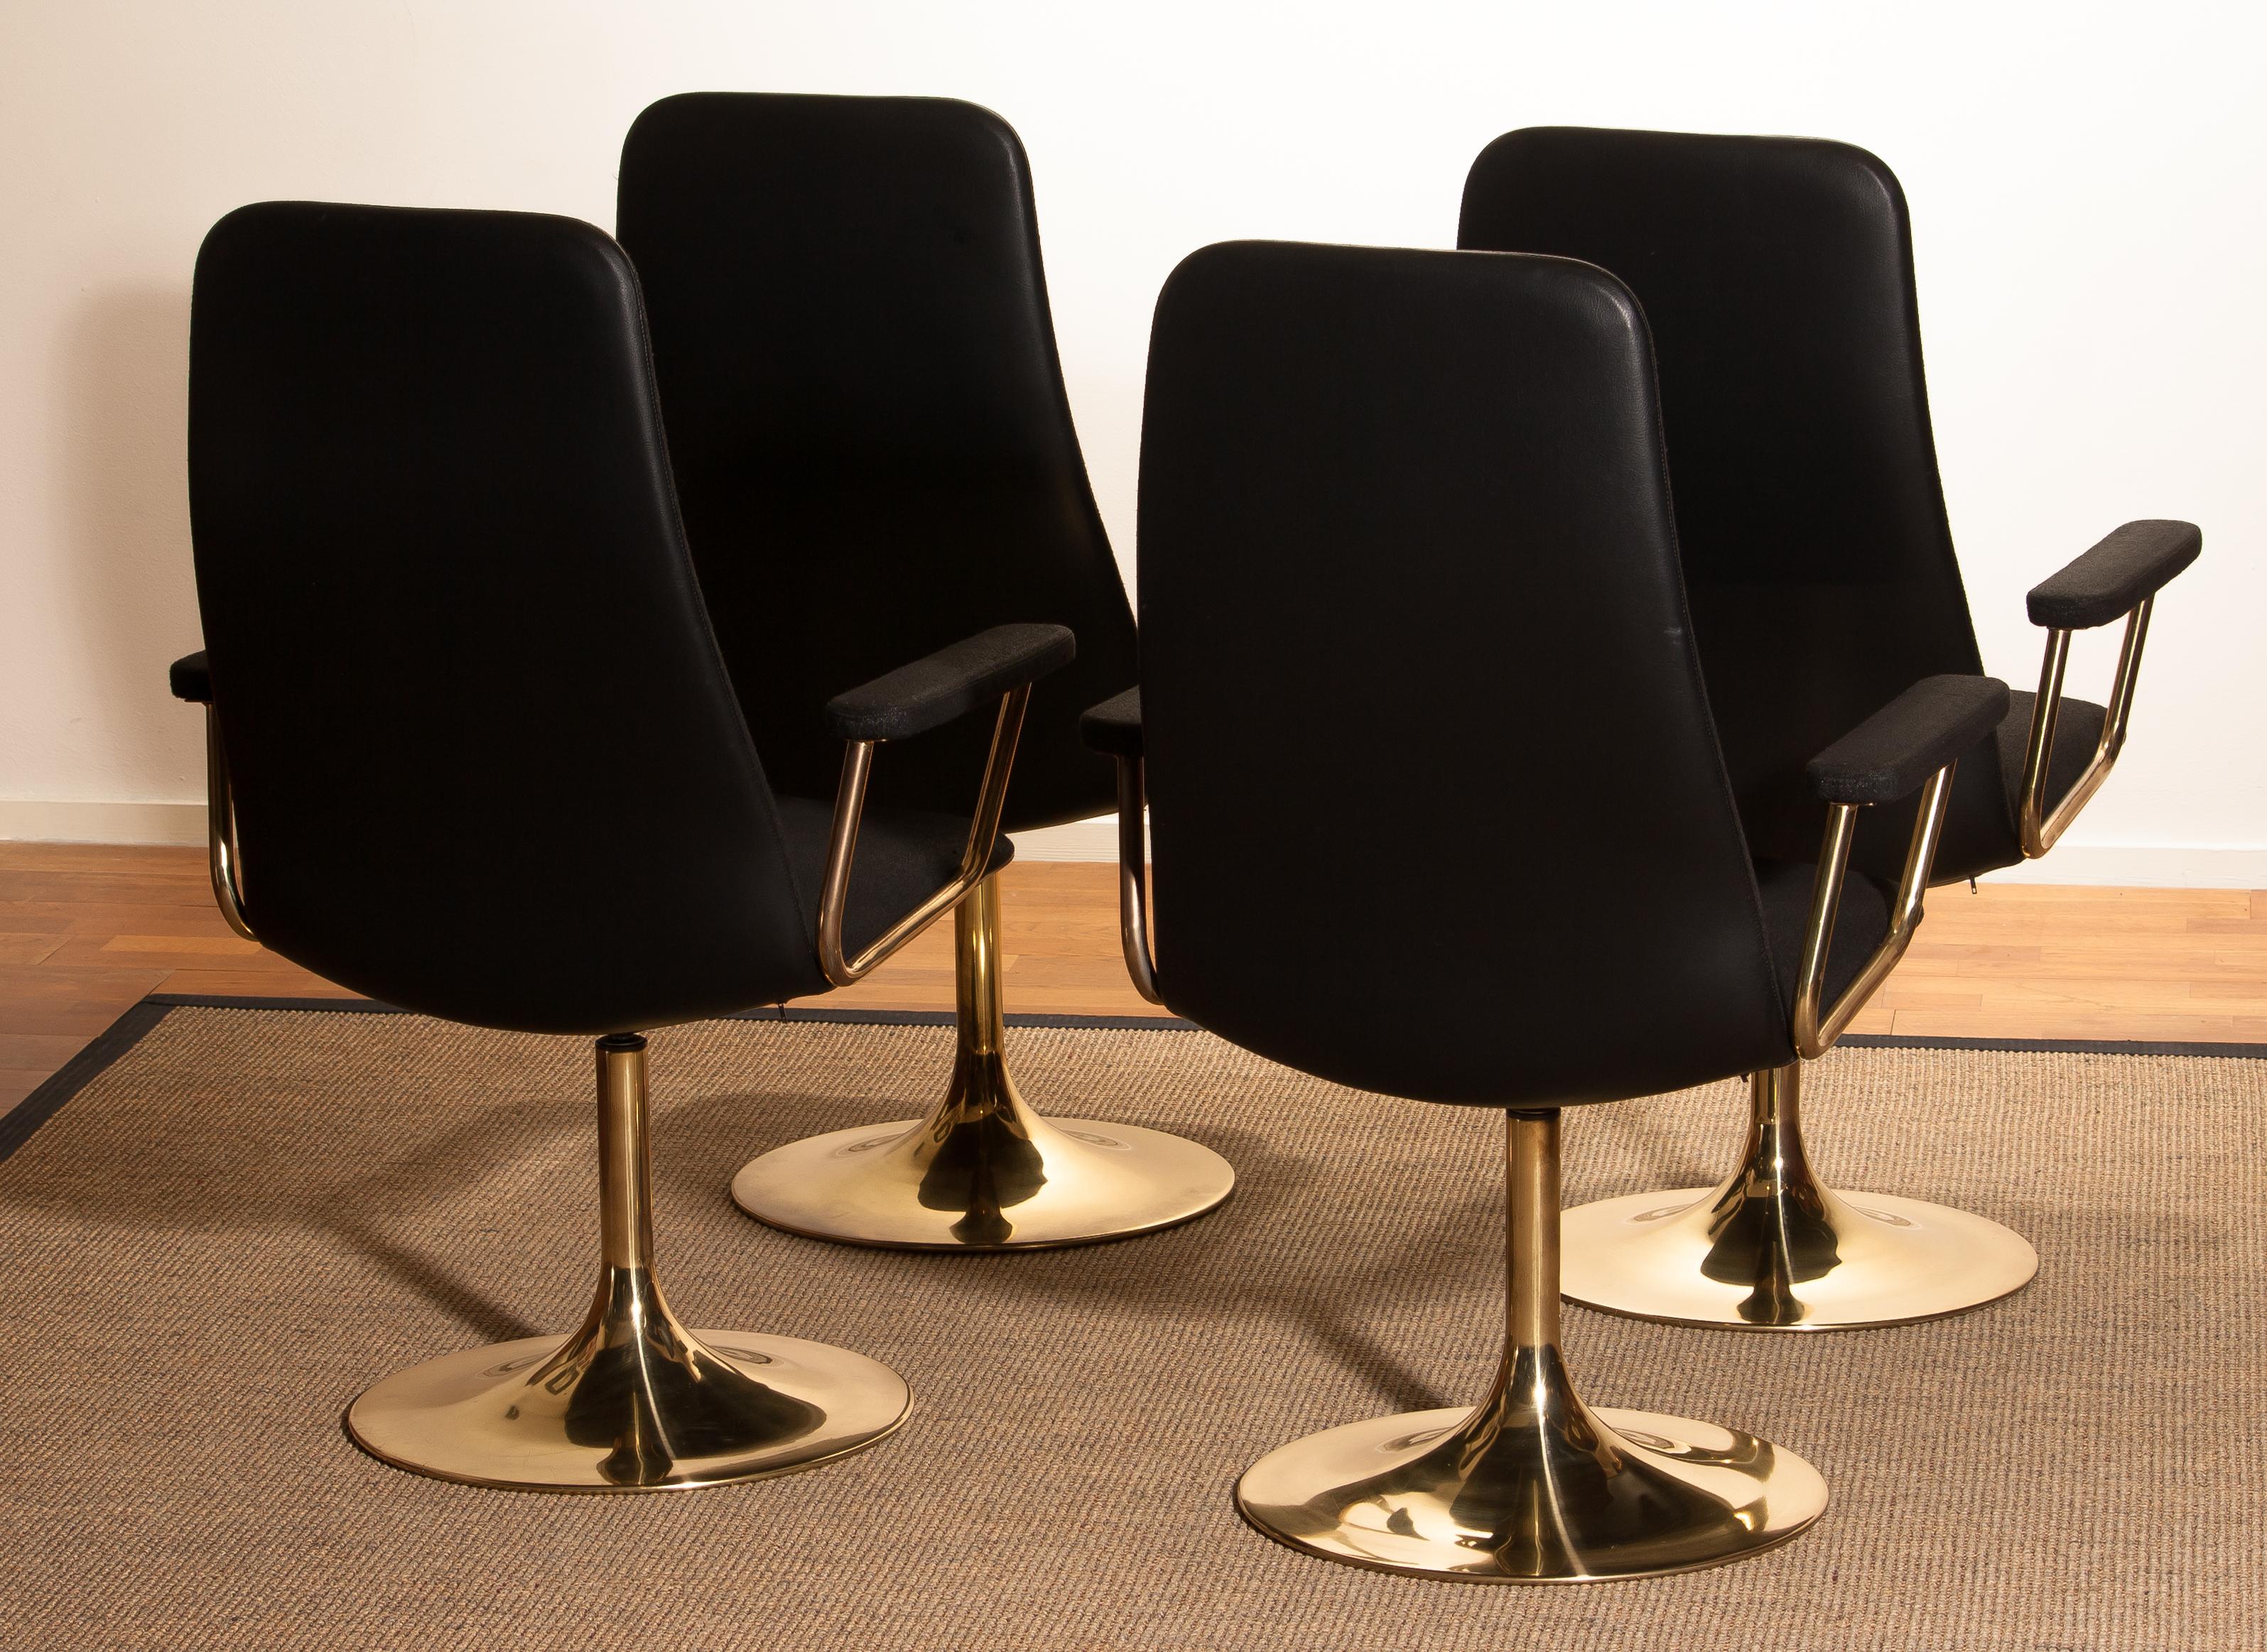 Four Golden, with Black Fabric, Armrest Swivel Chairs by Johanson Design, 1970 6